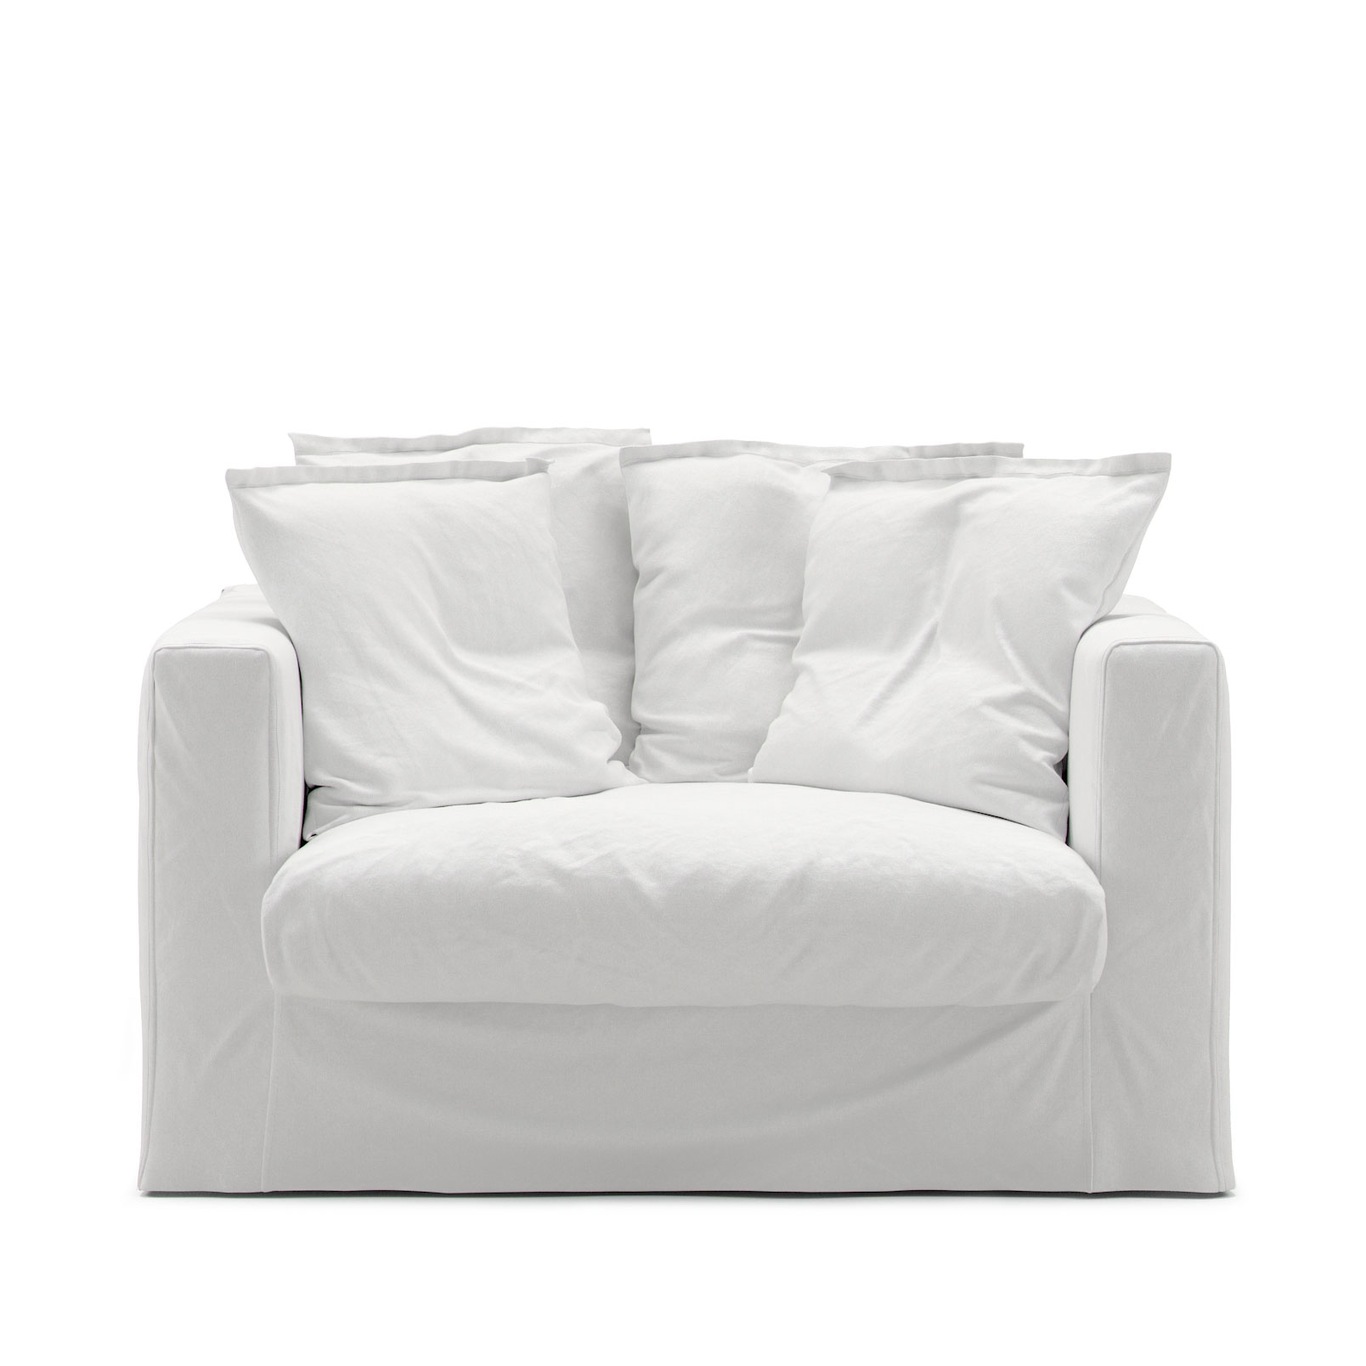 Le Grand Air Loveseat Upholstery Cotton, White